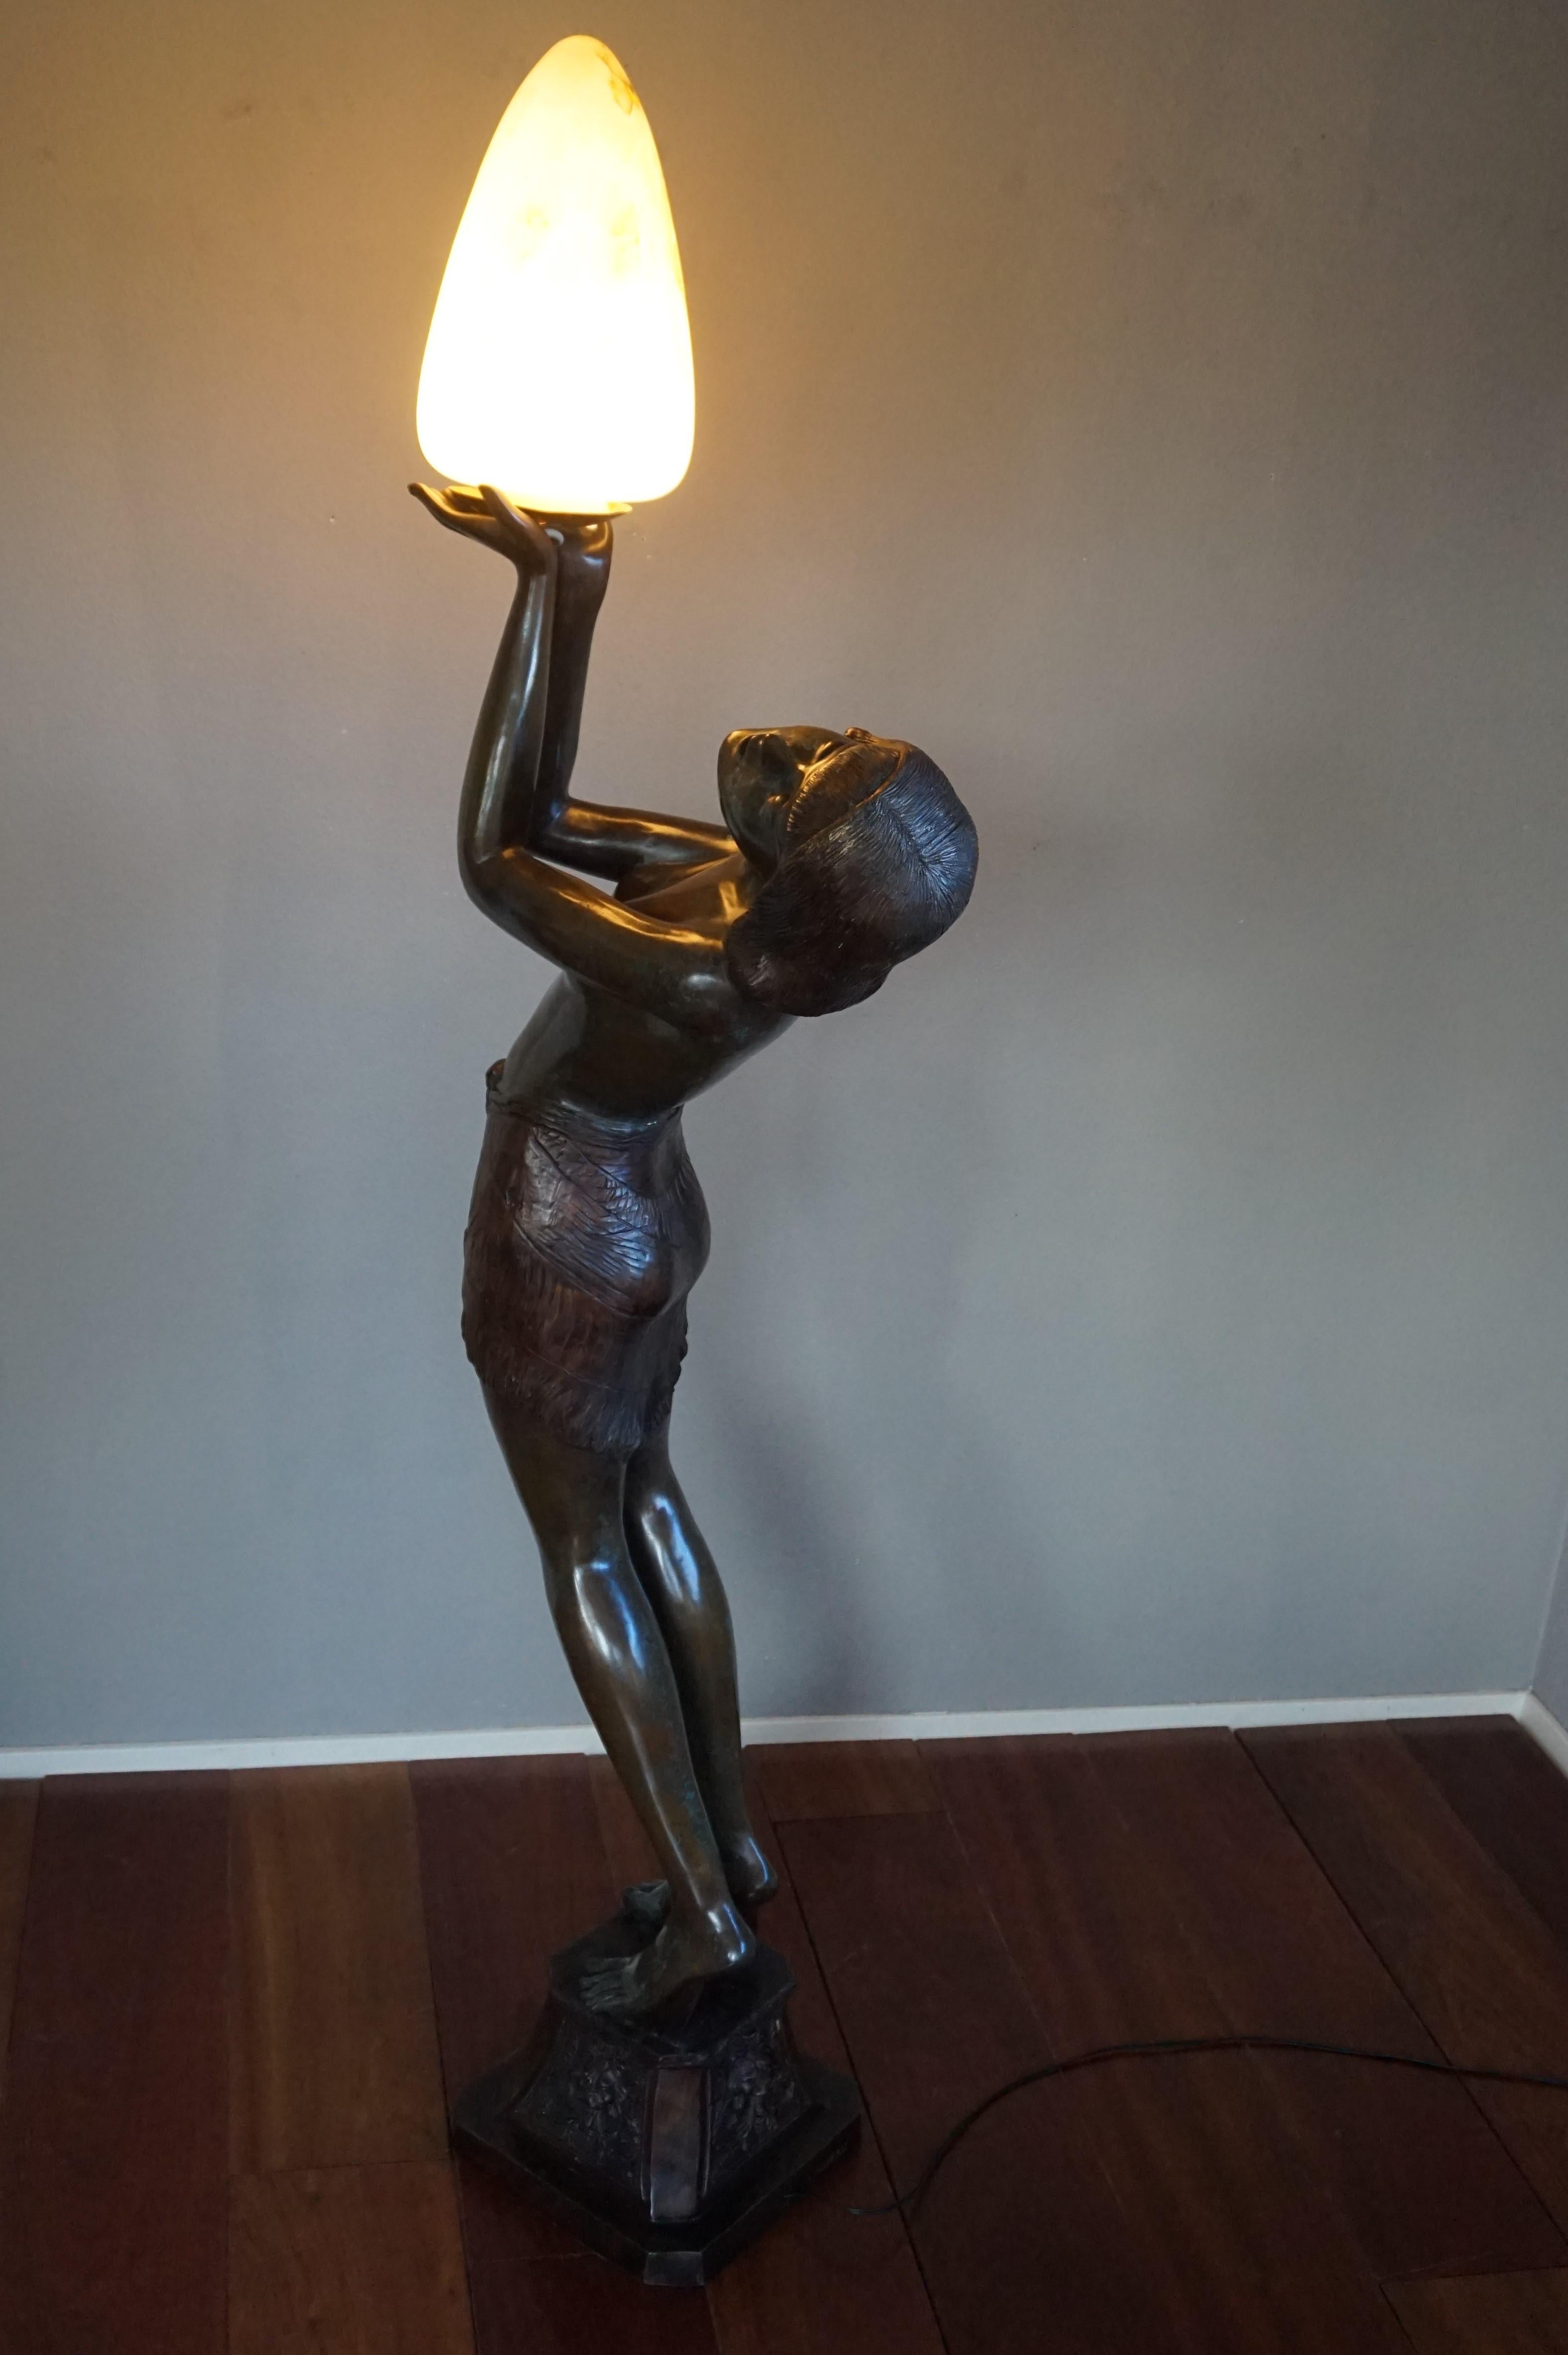 Beautifully patinated and impressive size, 20th century bronze floor lamp.

If you are looking for a beautiful bronze sculpture and a rare floor lamp at the same time then this prime example could be perfect for you. This large and highly